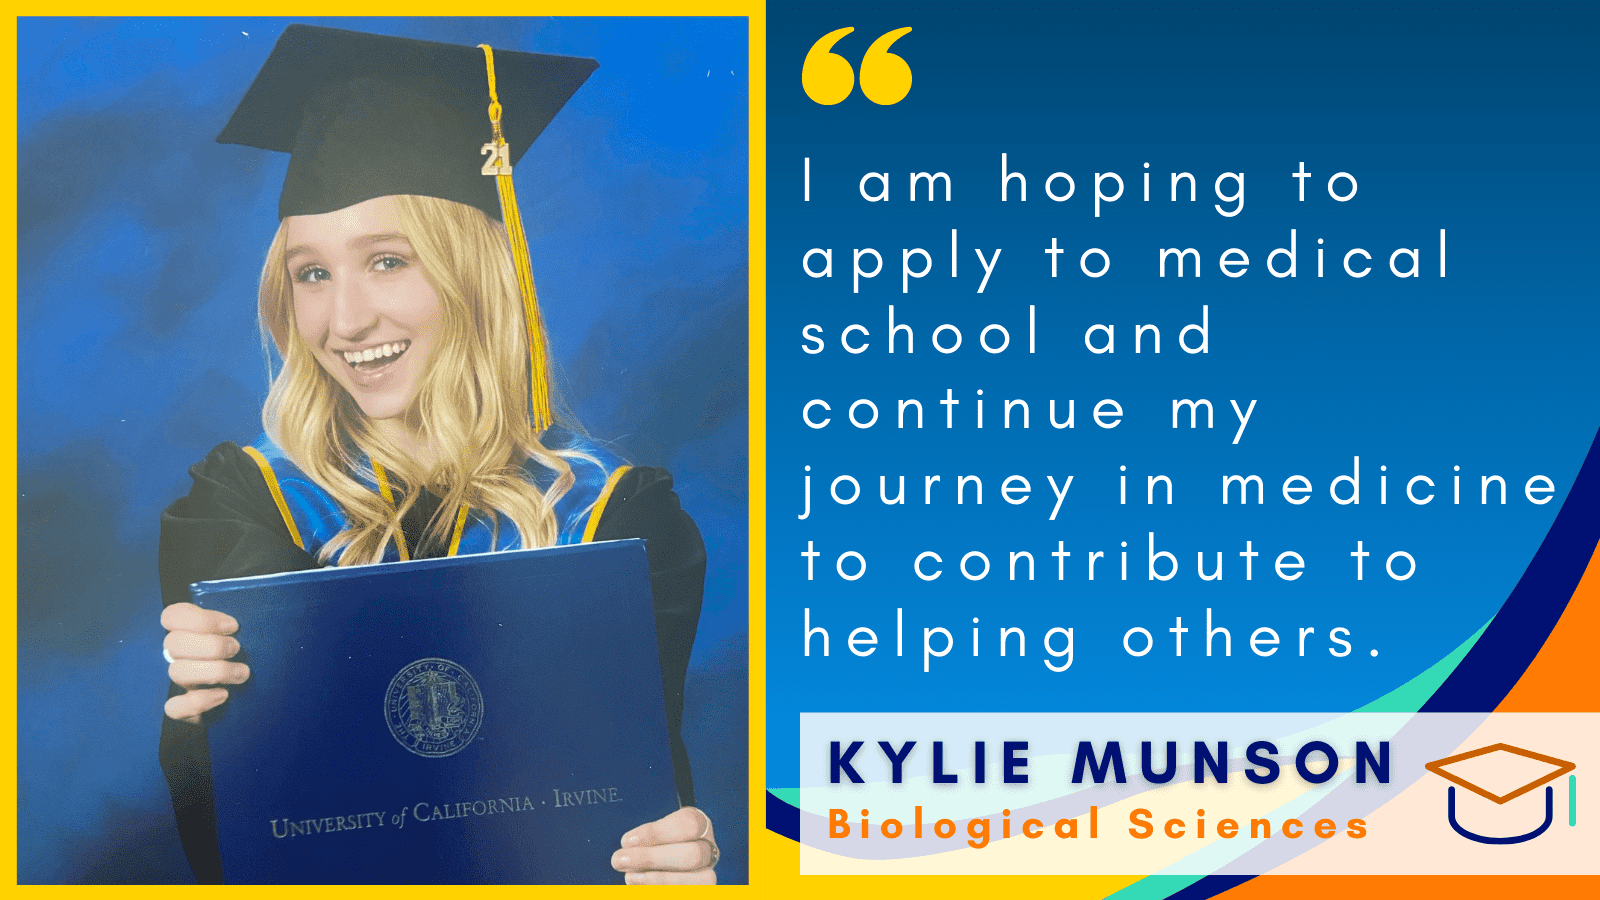 Image of Kylie Munson with her quote.